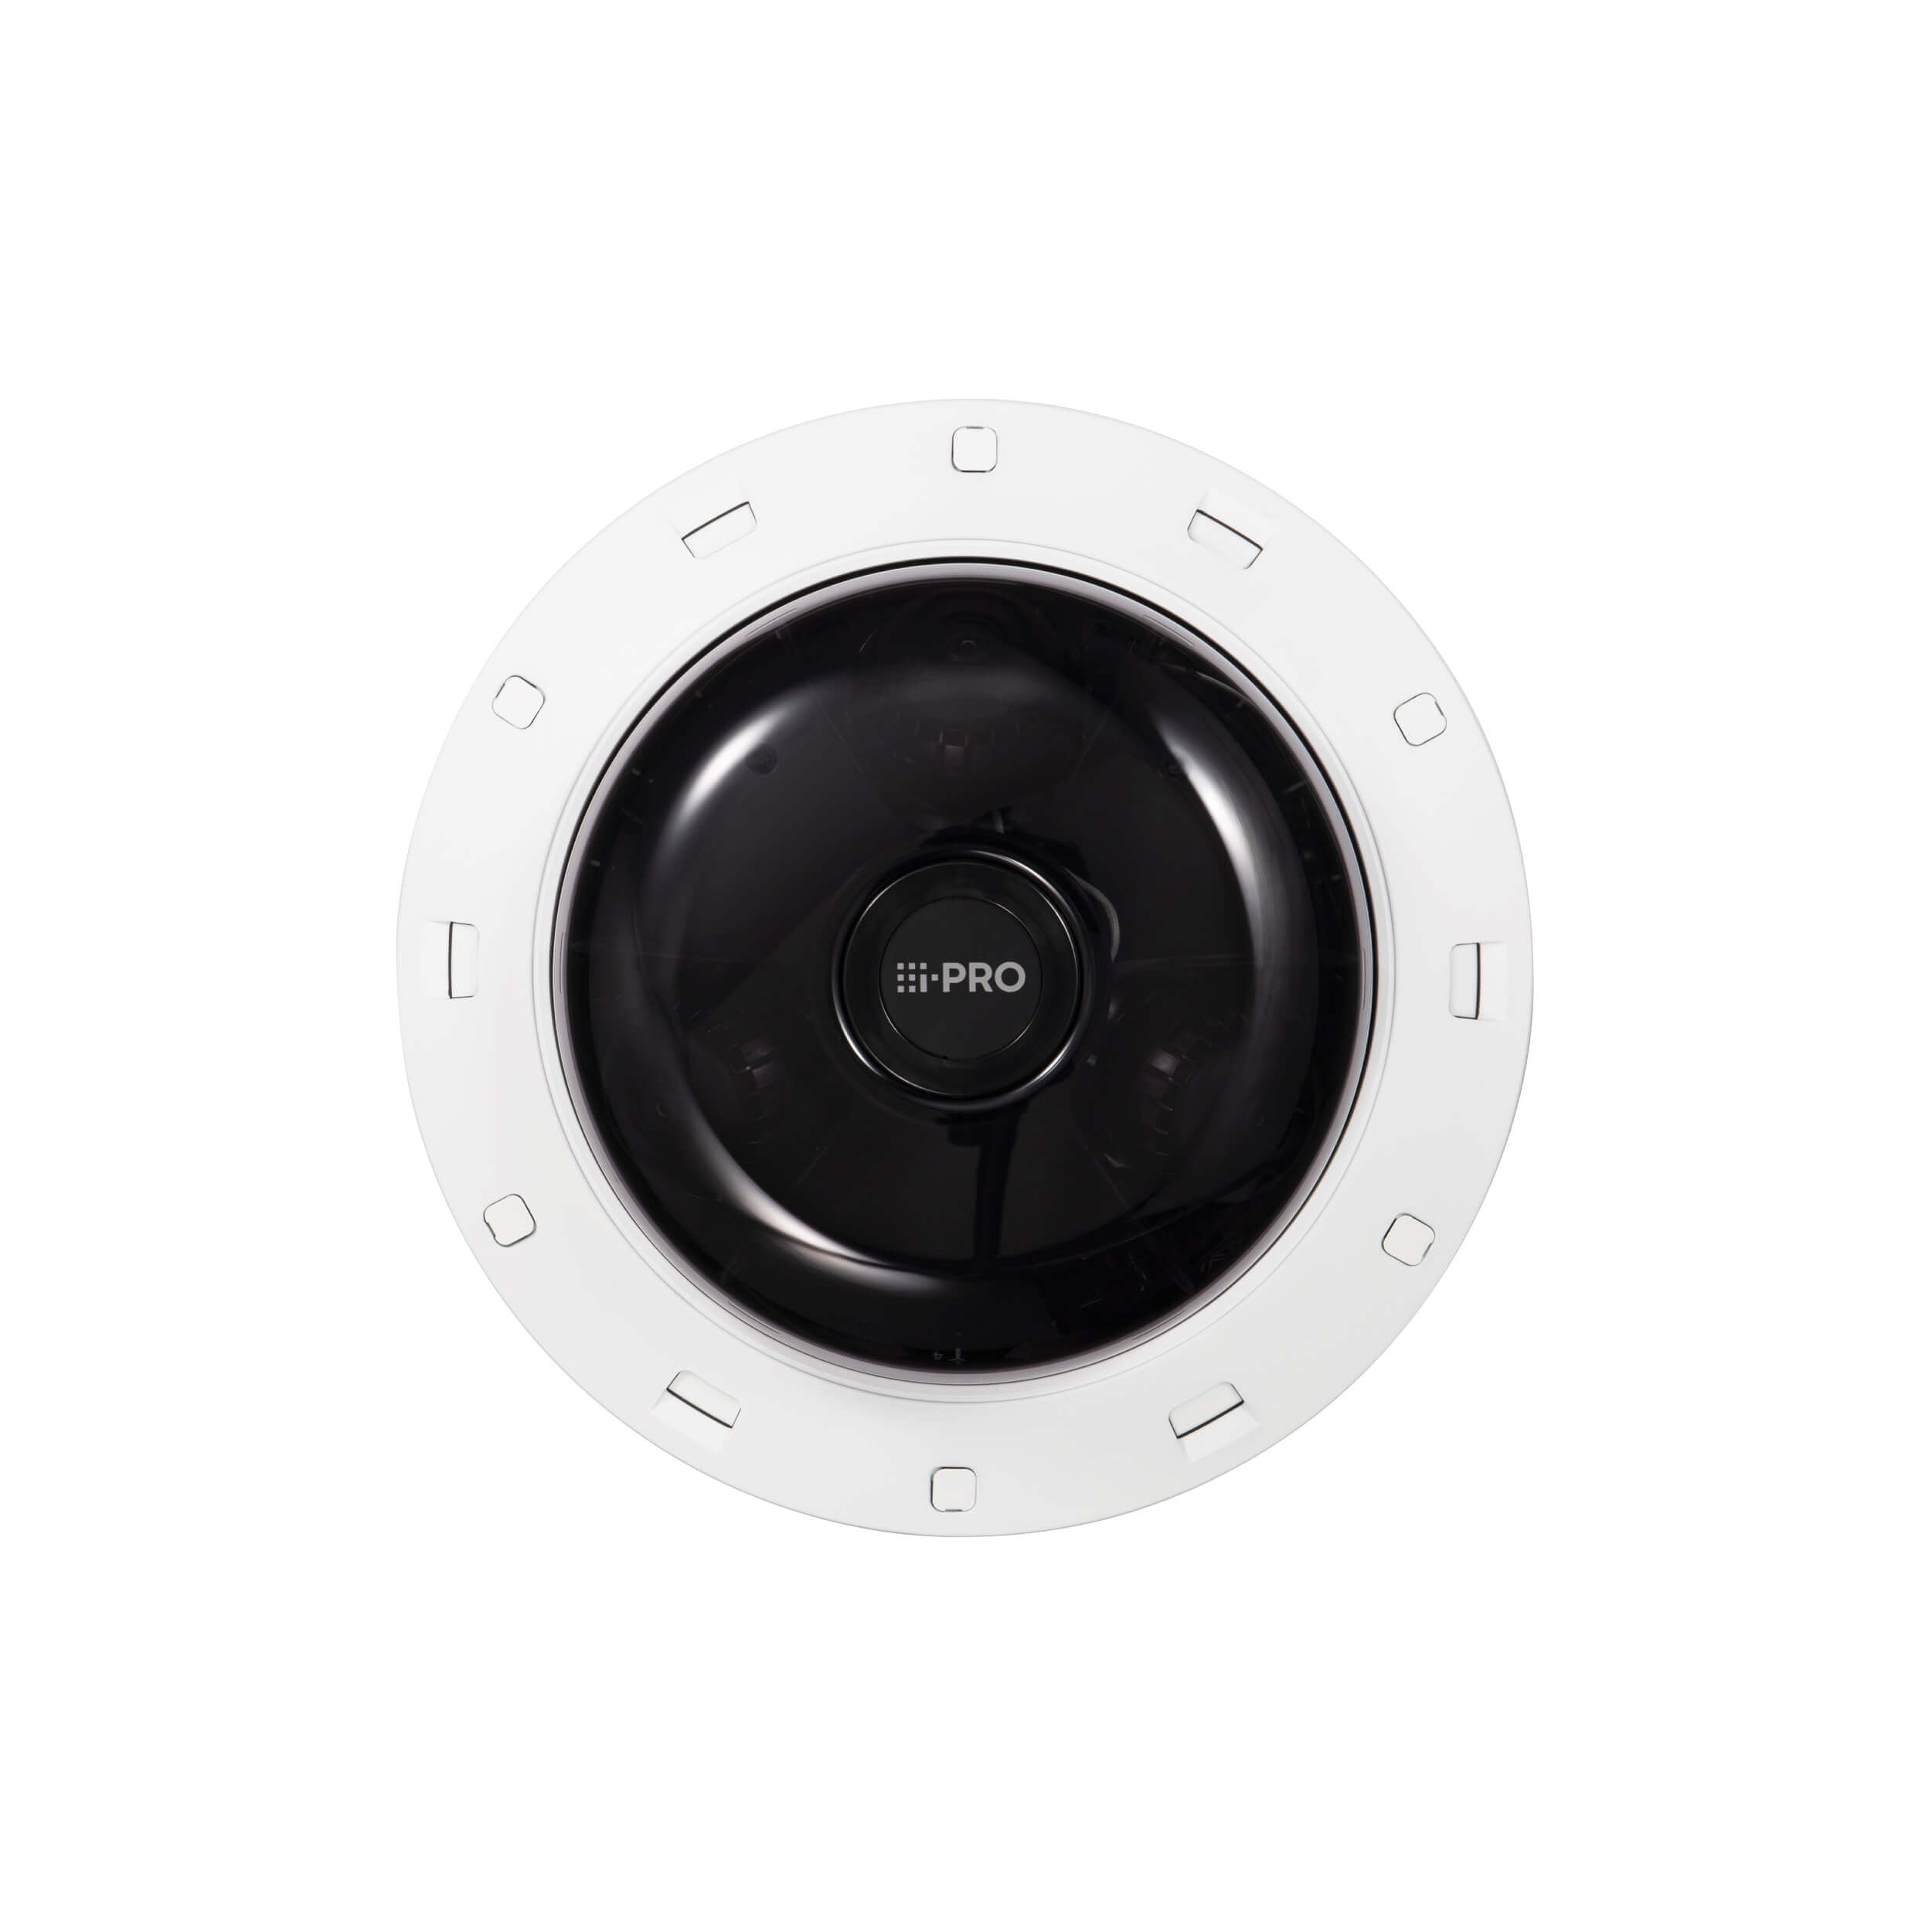 i-PRO WV-S8574L 4x4K(33MP) Outdoor Multi-Directional Network Camera with AI Engine